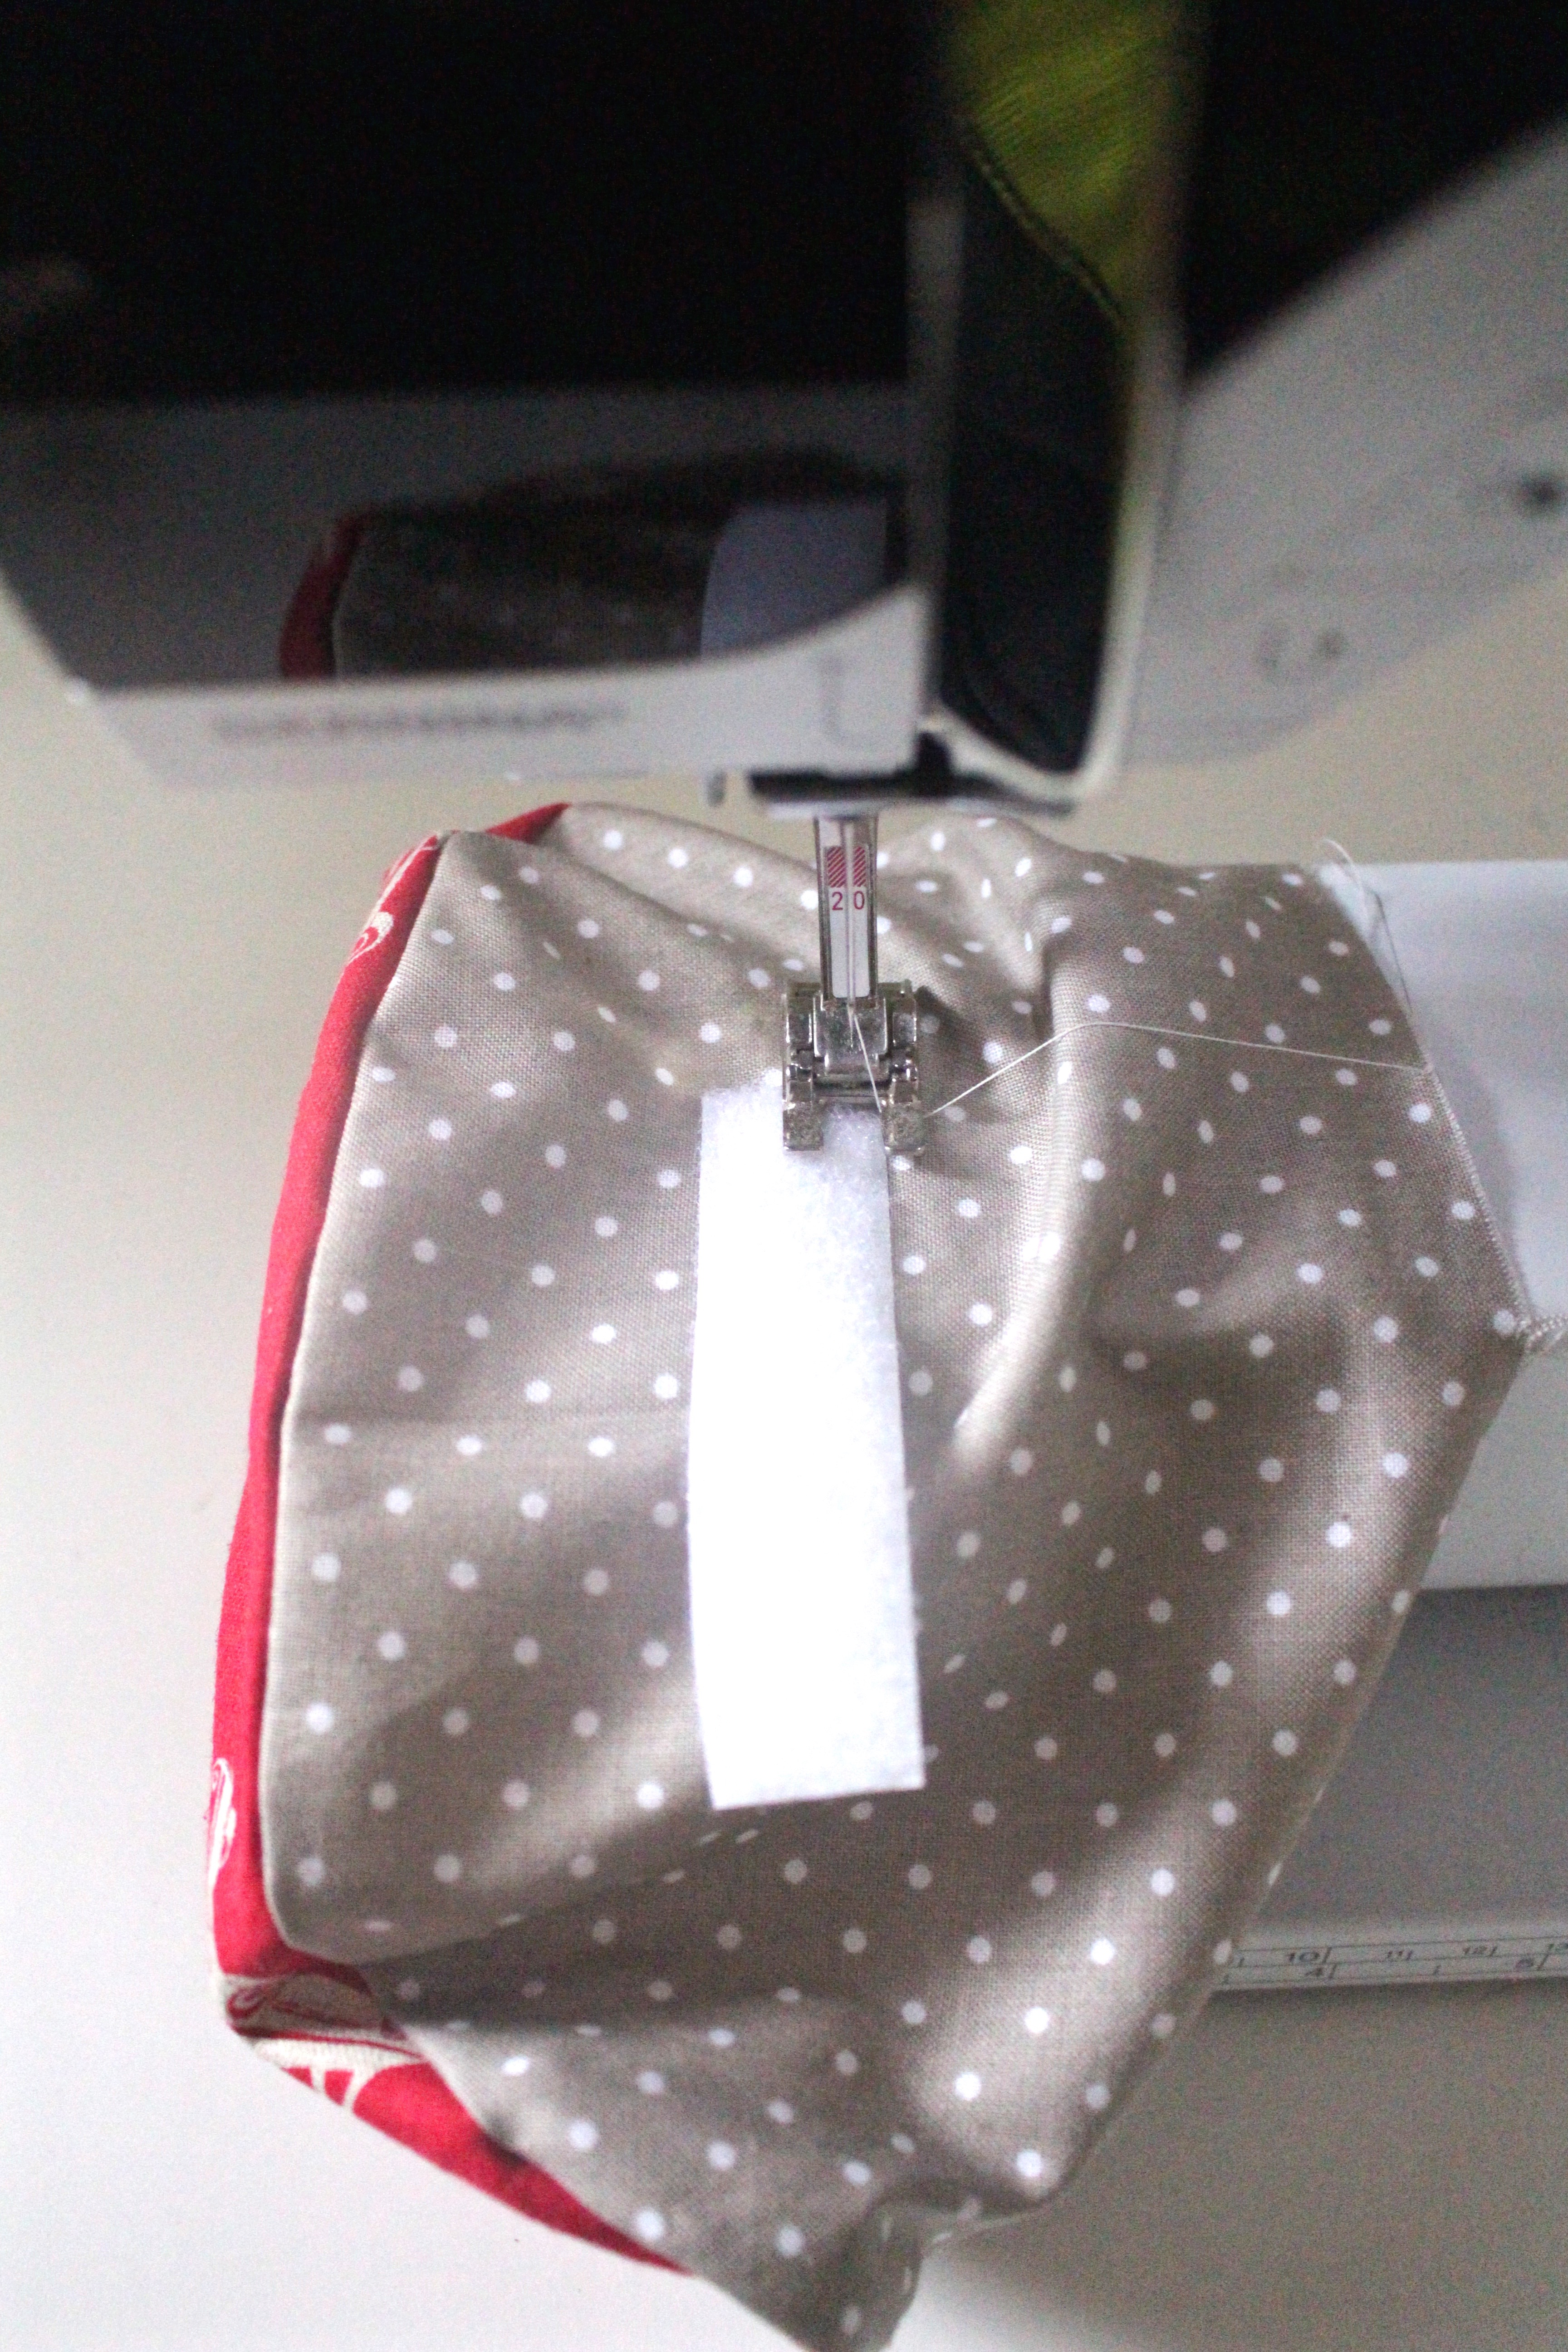 Reusable washable lunch bag Tutorial step nine: sew the Velcro